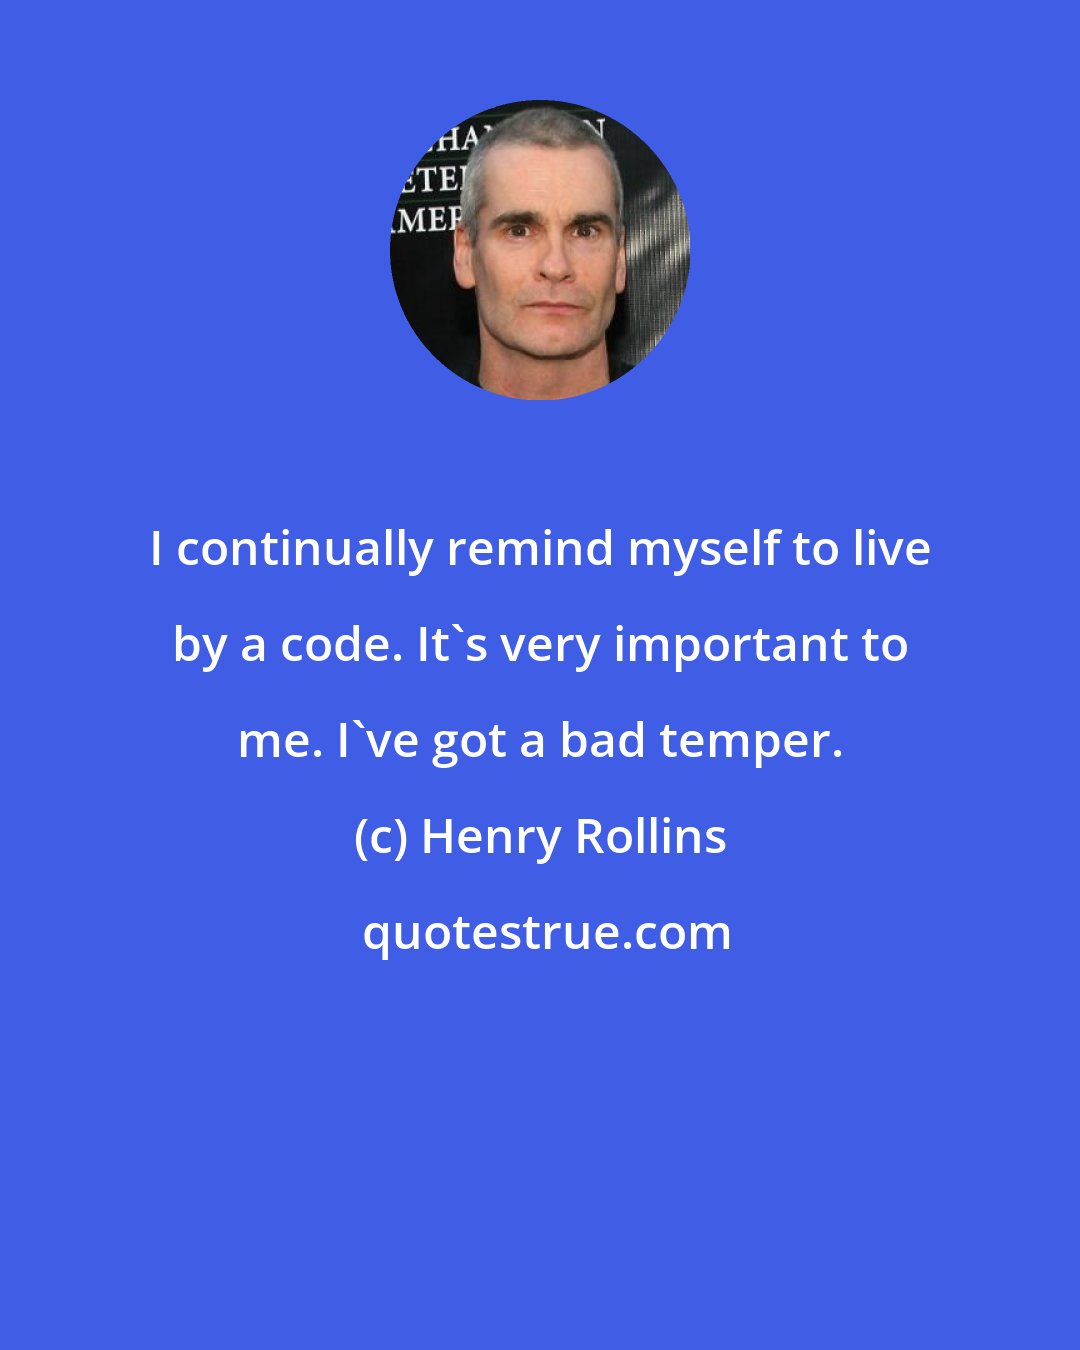 Henry Rollins: I continually remind myself to live by a code. It's very important to me. I've got a bad temper.